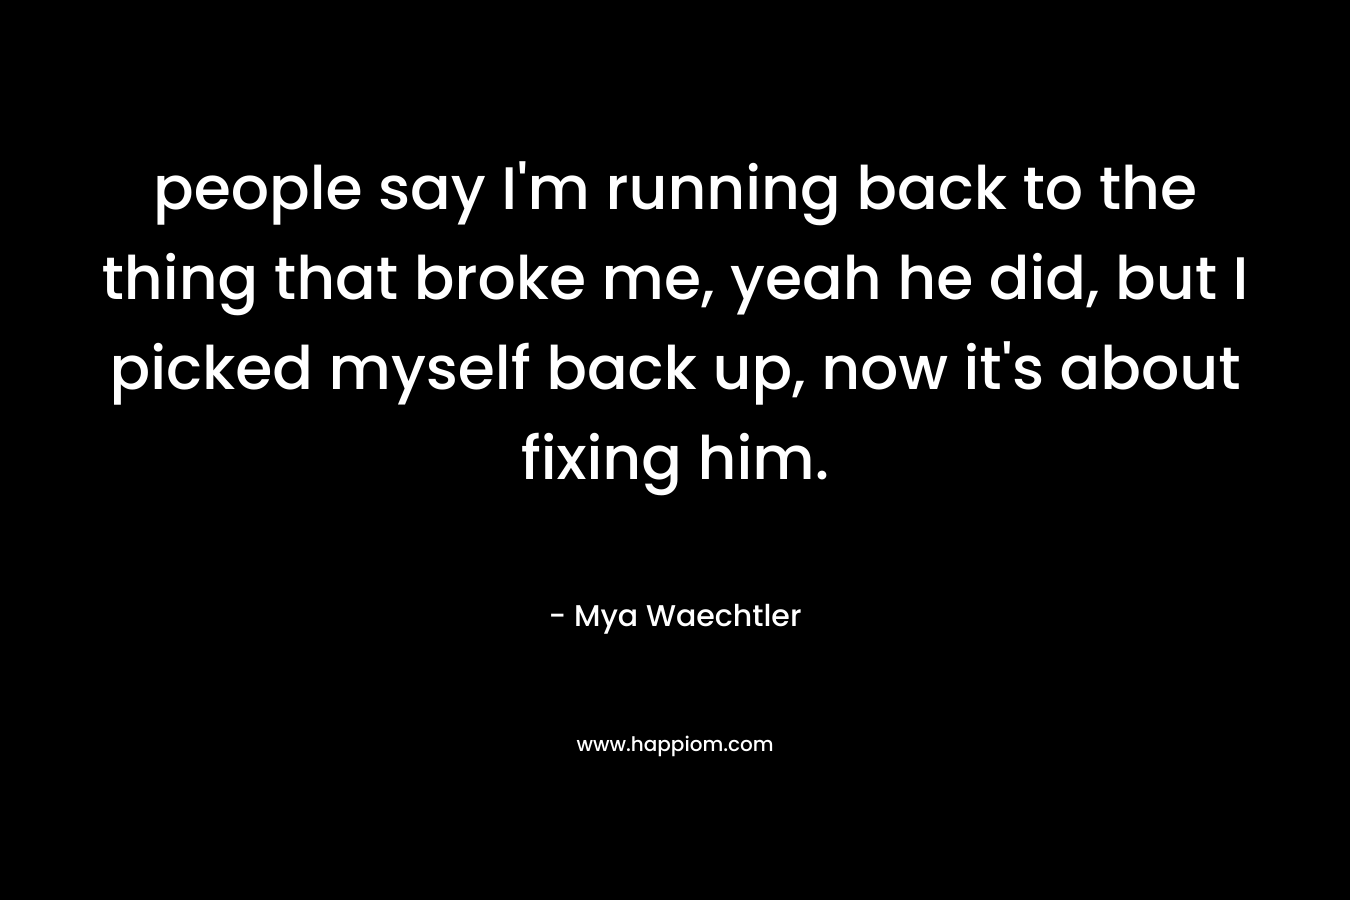 people say I’m running back to the thing that broke me, yeah he did, but I picked myself back up, now it’s about fixing him. – Mya Waechtler